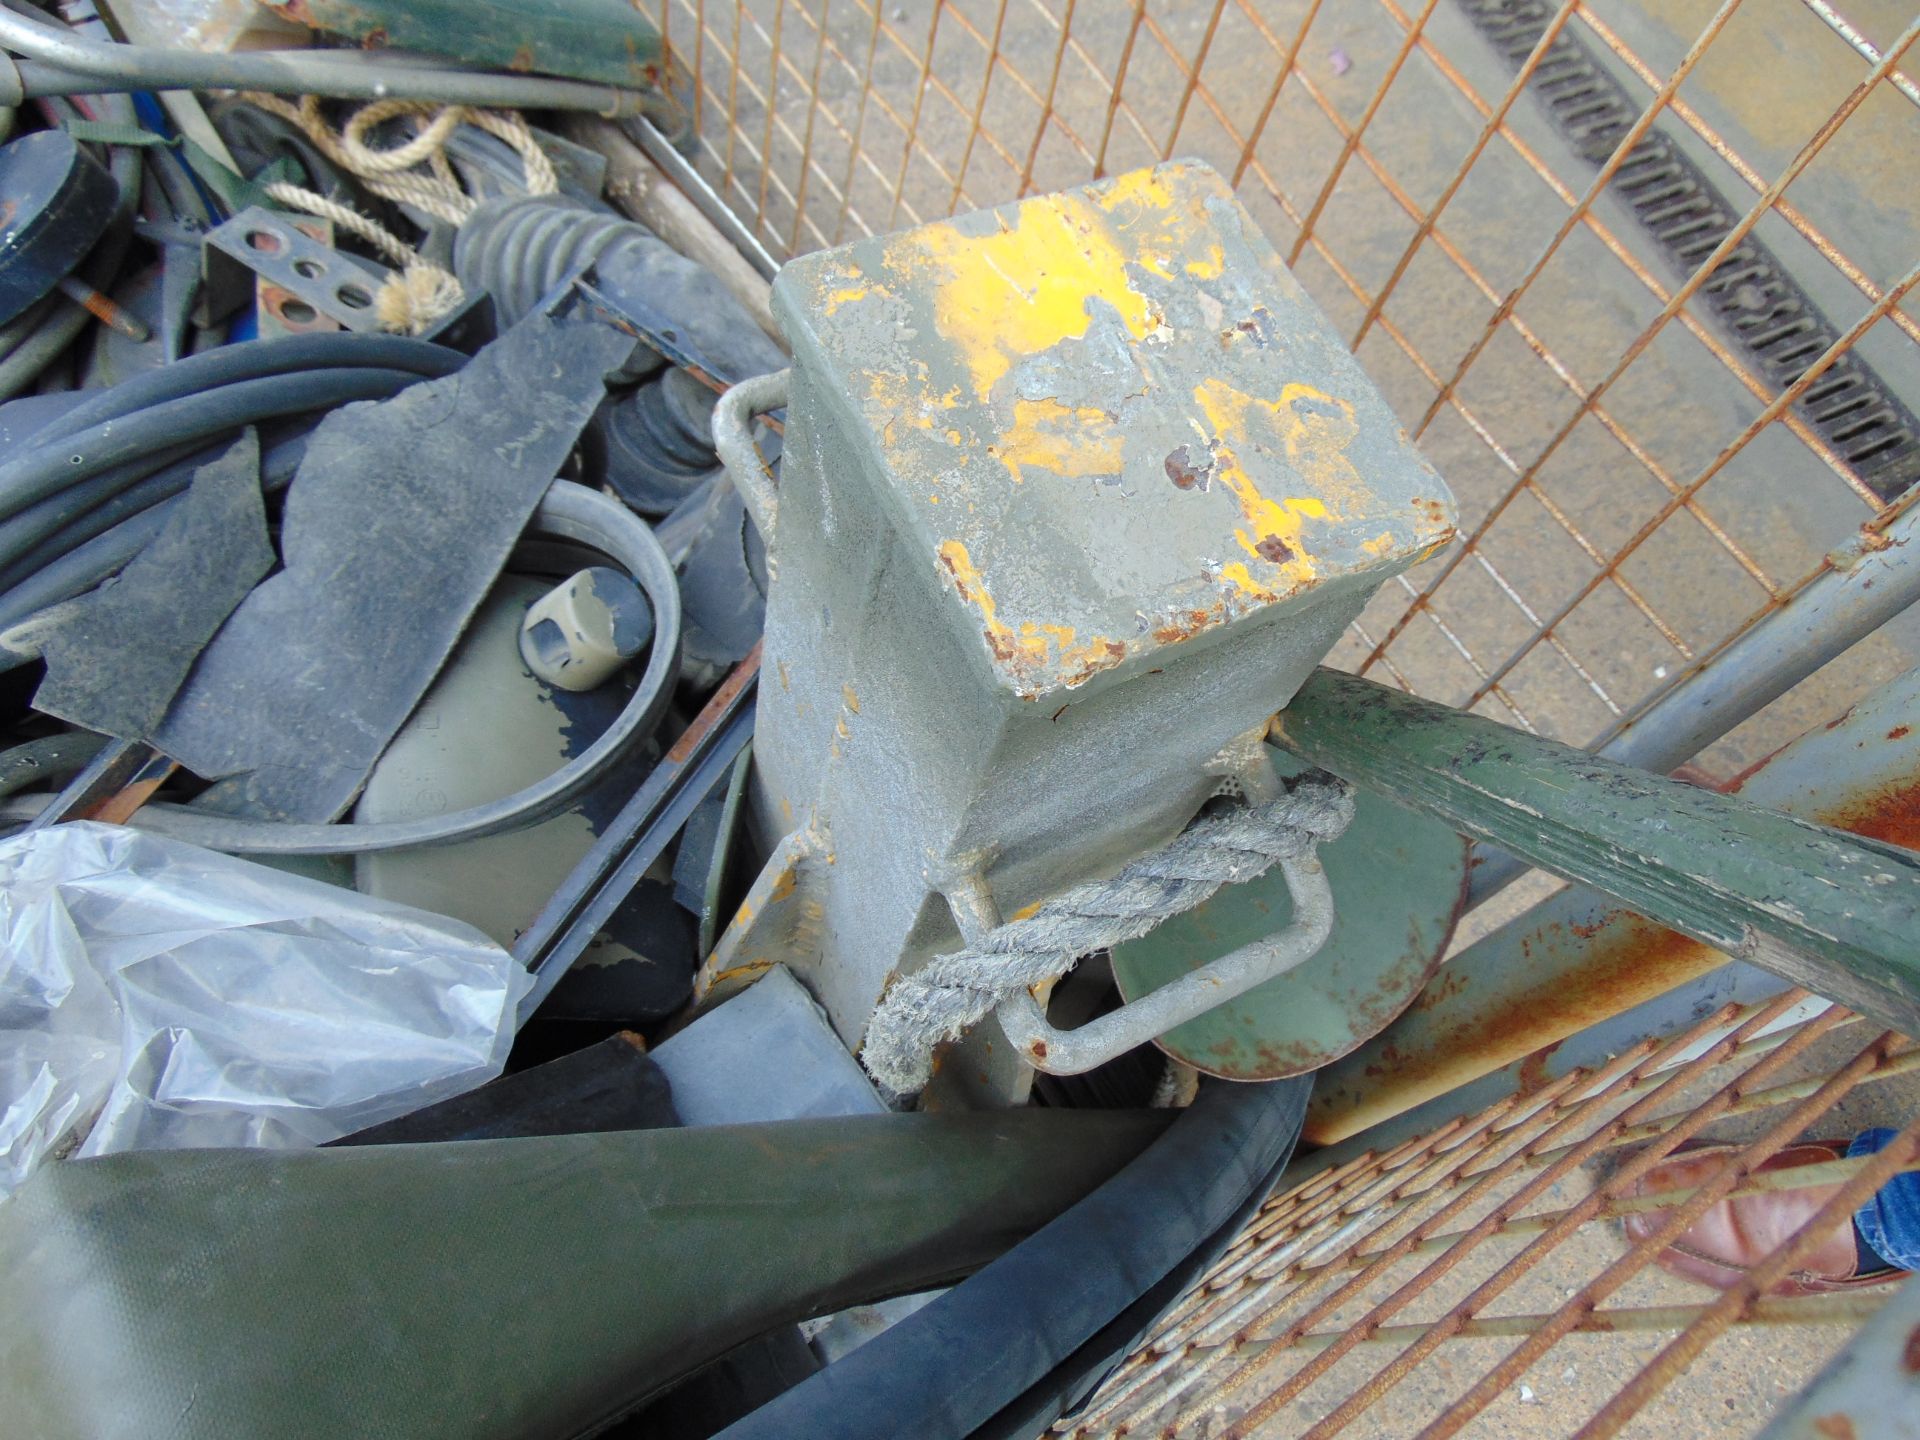 1 x Stillage Land Rover Spares, Wheel Chocks, Air Lines, Mirrors, Axle Stand etc from MoD - Image 6 of 8